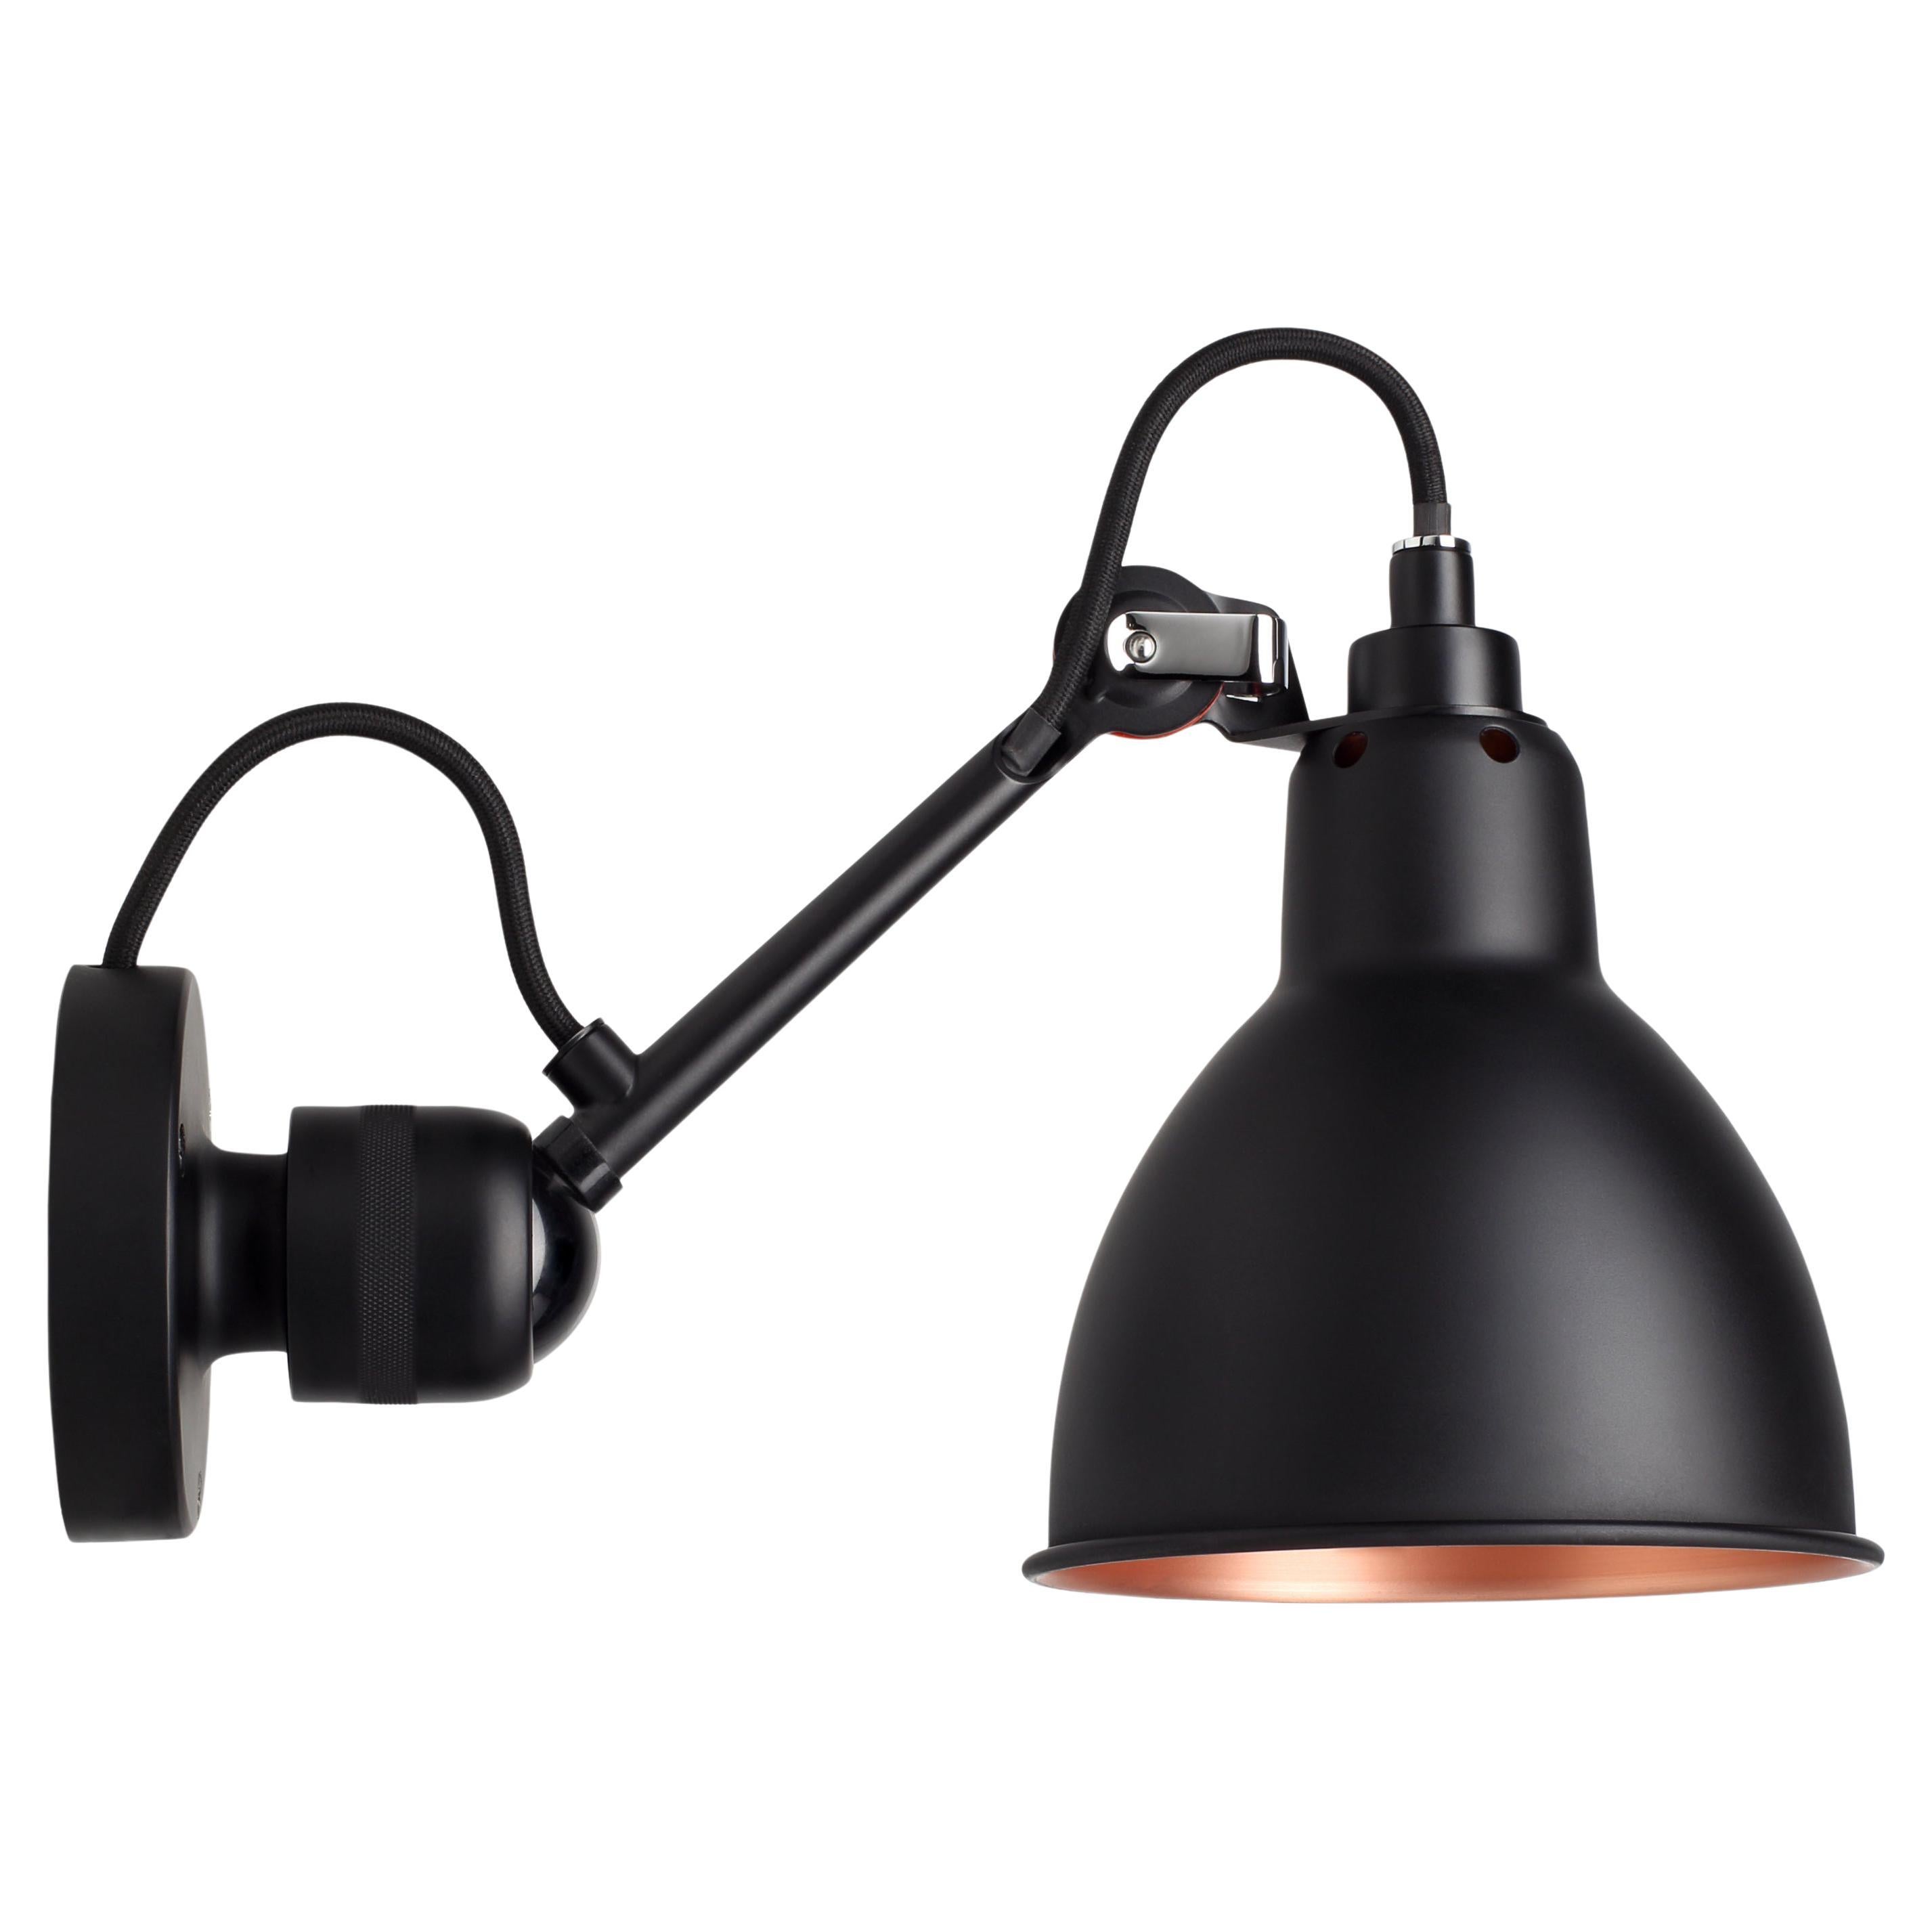 Black and Copper Lampe Gras N° 304 Wall Lamp by Bernard-Albin Gras For Sale